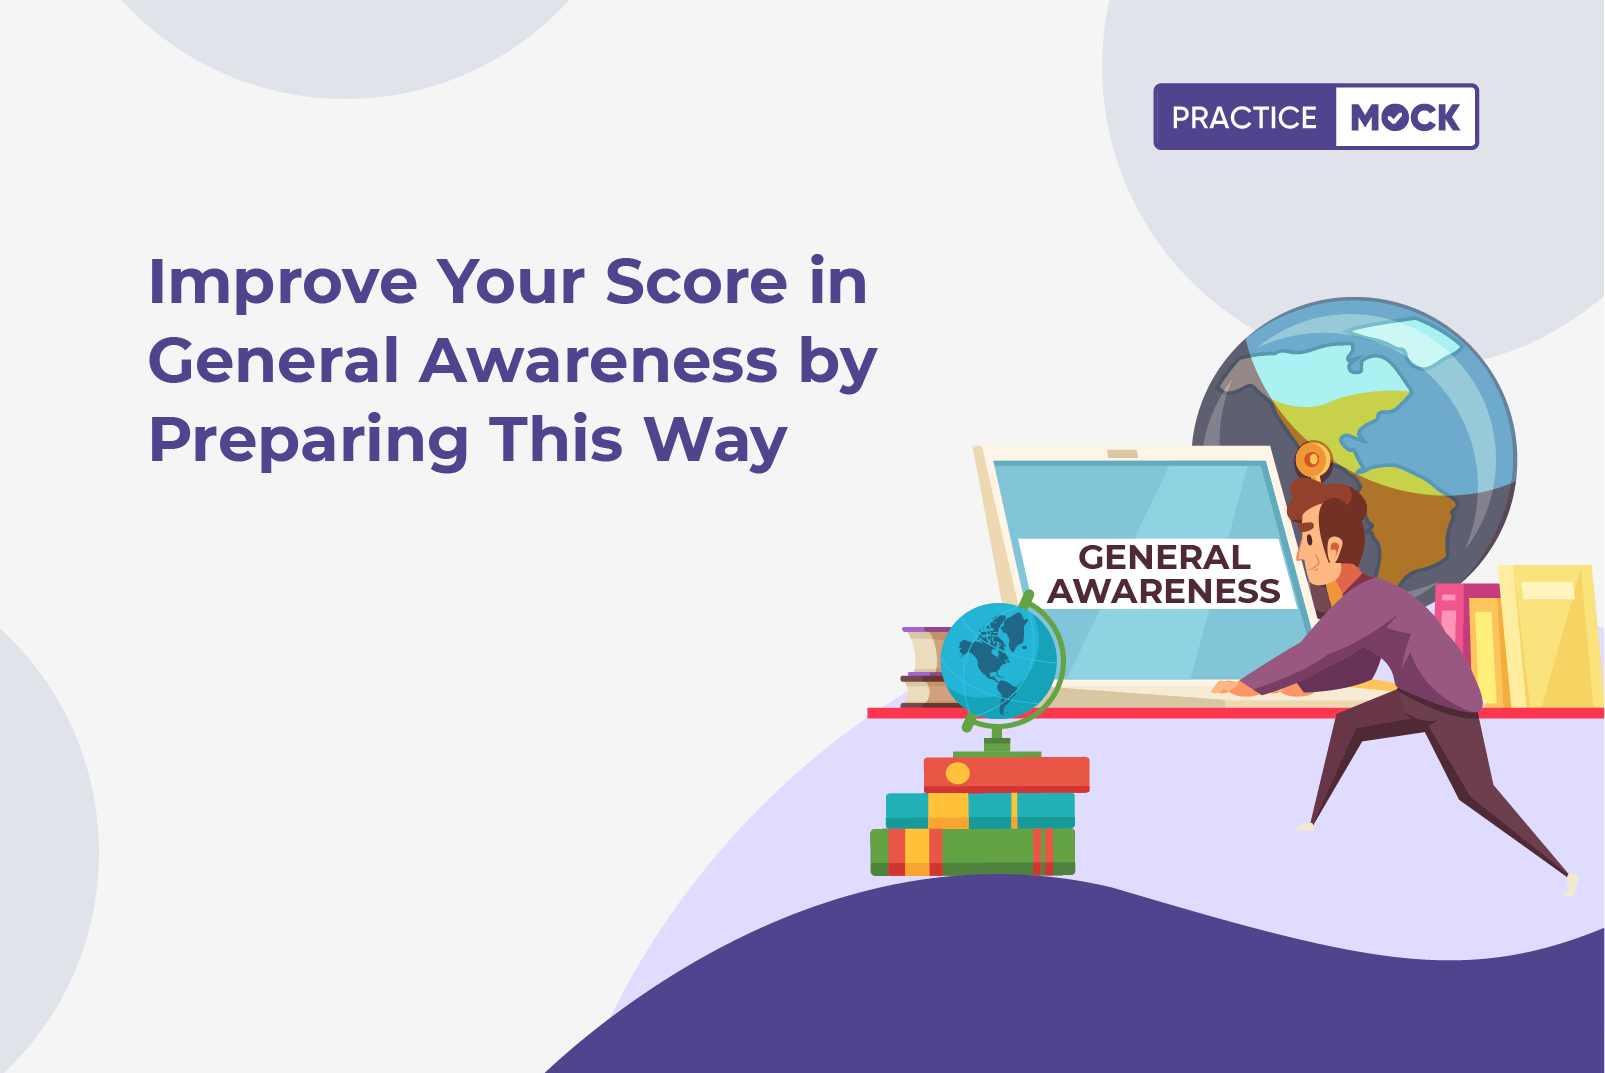 Improve Your Score in General Awareness by Preparing This Way